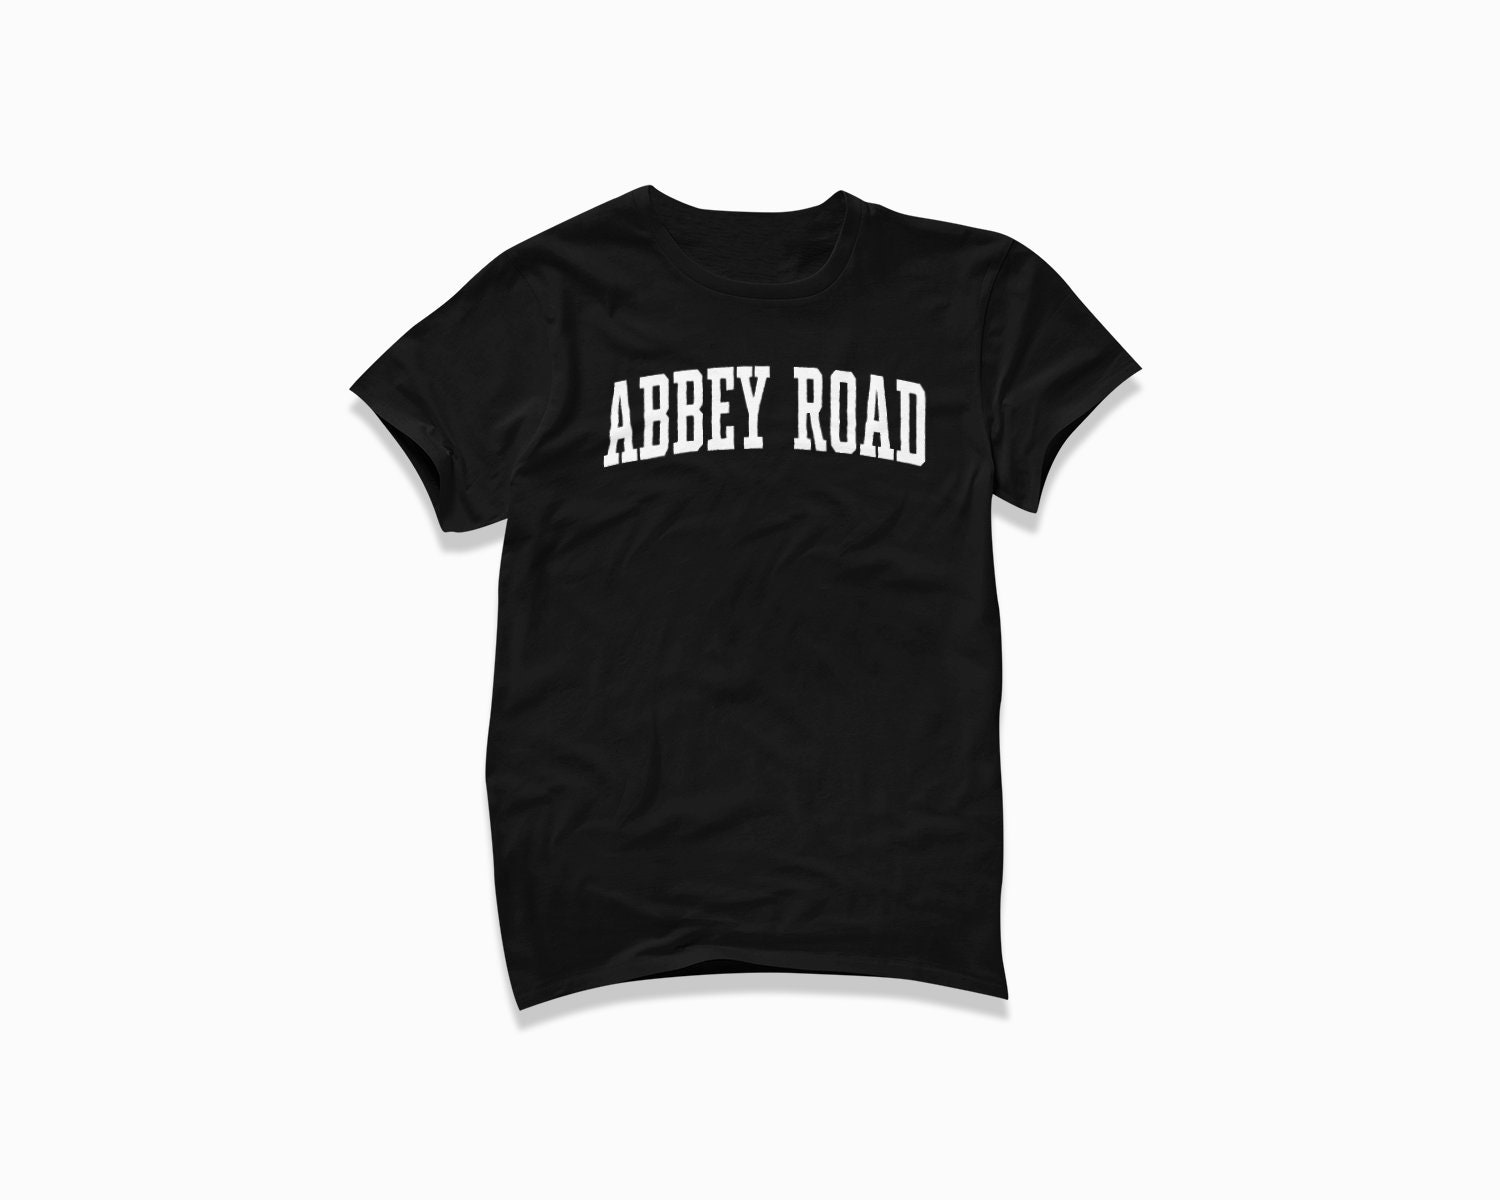 Discover Abbey Road London T-Shirt